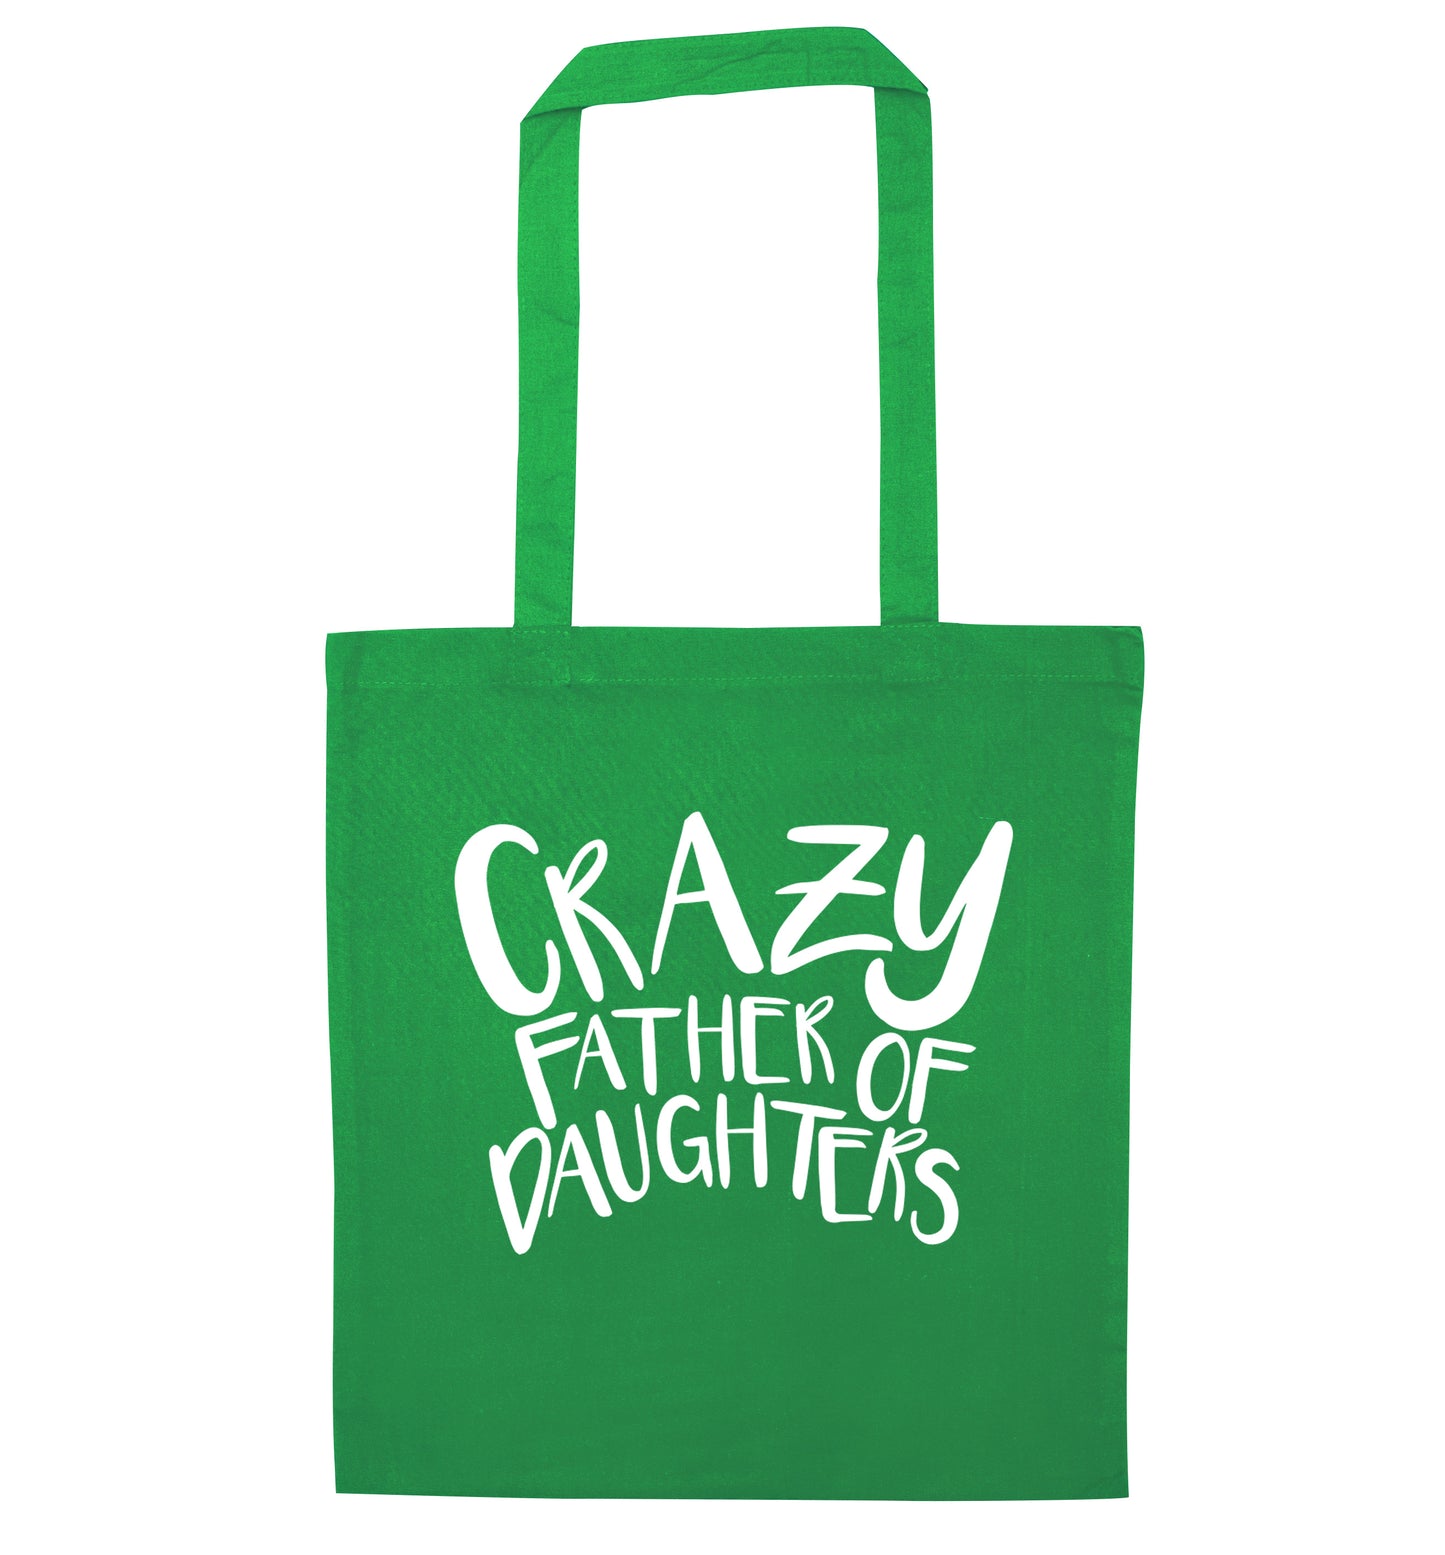 Crazy father of daughters green tote bag